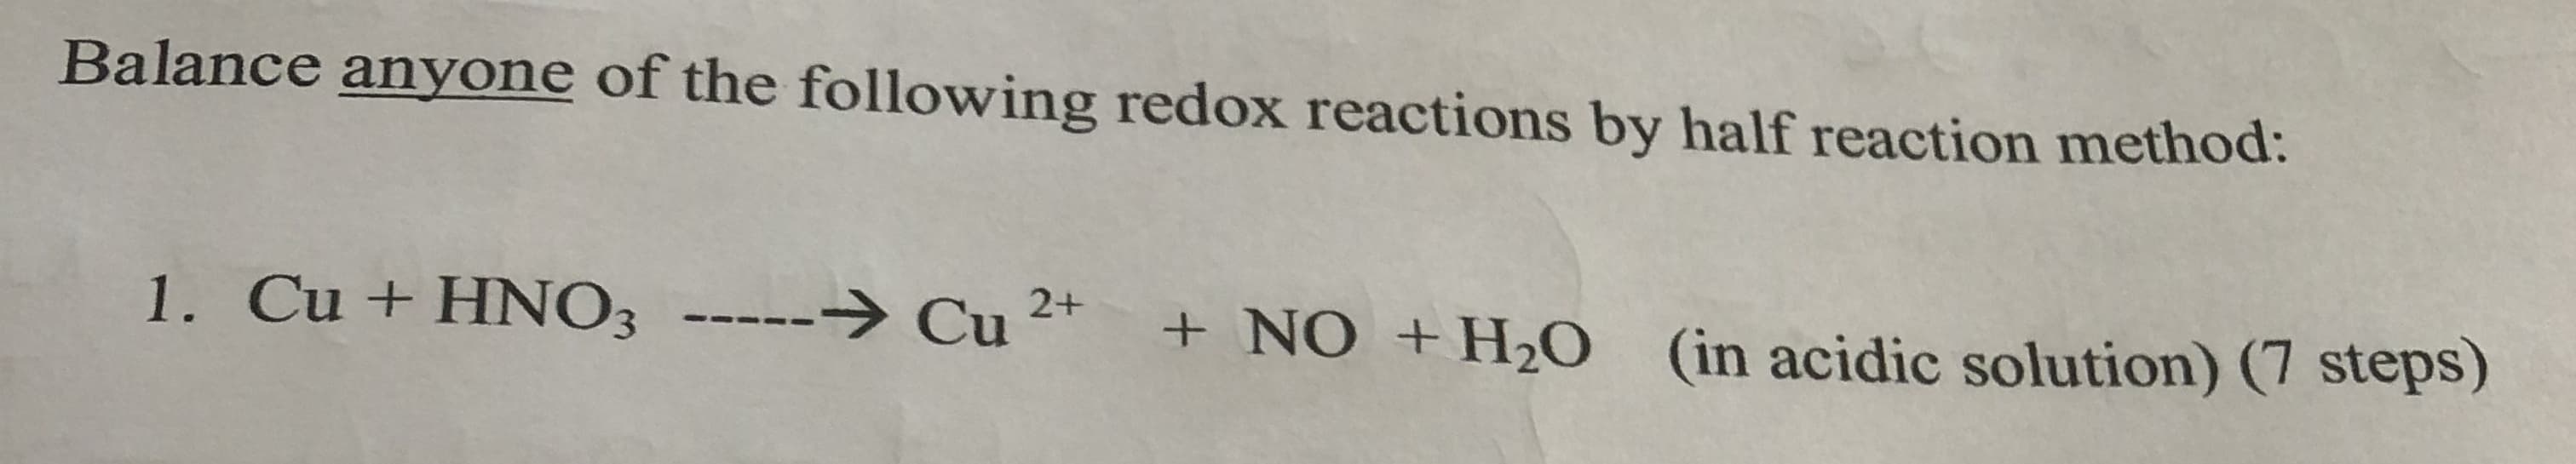 Balance anyone of the following redox reactions by half reaction method:
1. Cu + HNO3
-----→ Cu
+ NO +H20
(in acidic solution) (7 steps)
